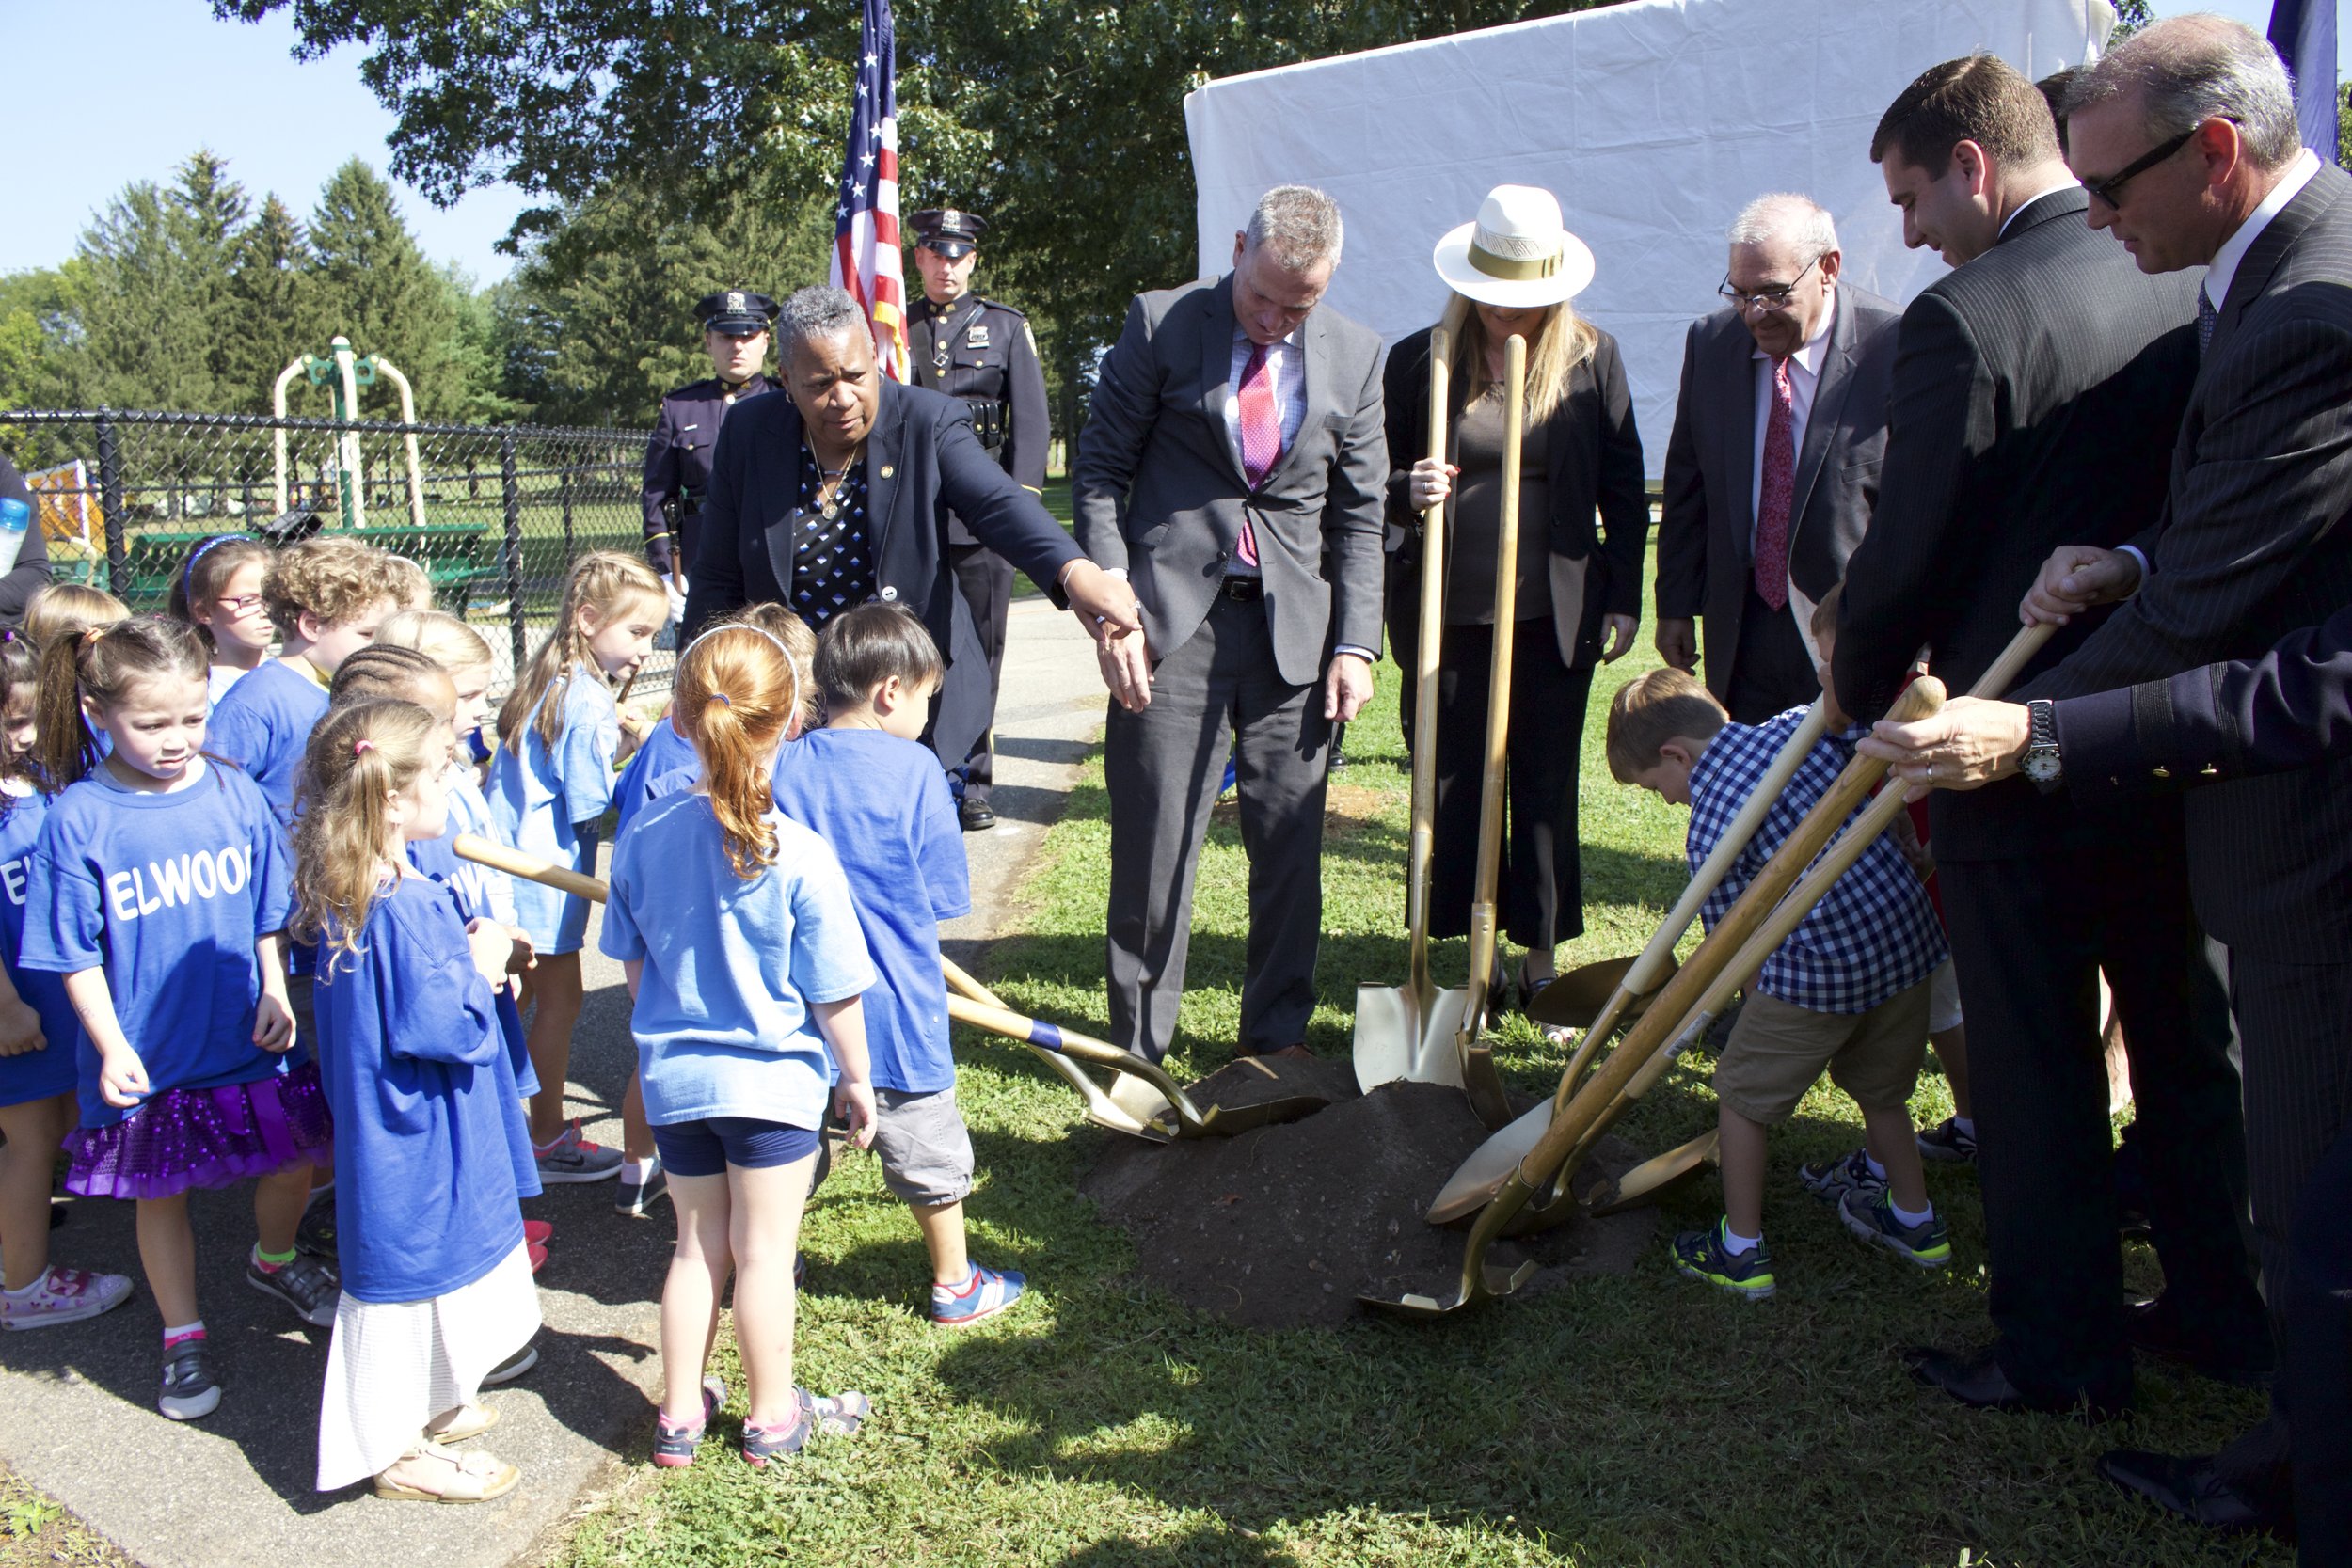   Austin Tuozzolo, right, with local officials and children in his kindergarten class break ground on the town’s first spray park, which has been dedicated to his father the late NYPD Sgt. Paul Tuozzolo.   Long Islander News photo/Janee Law  